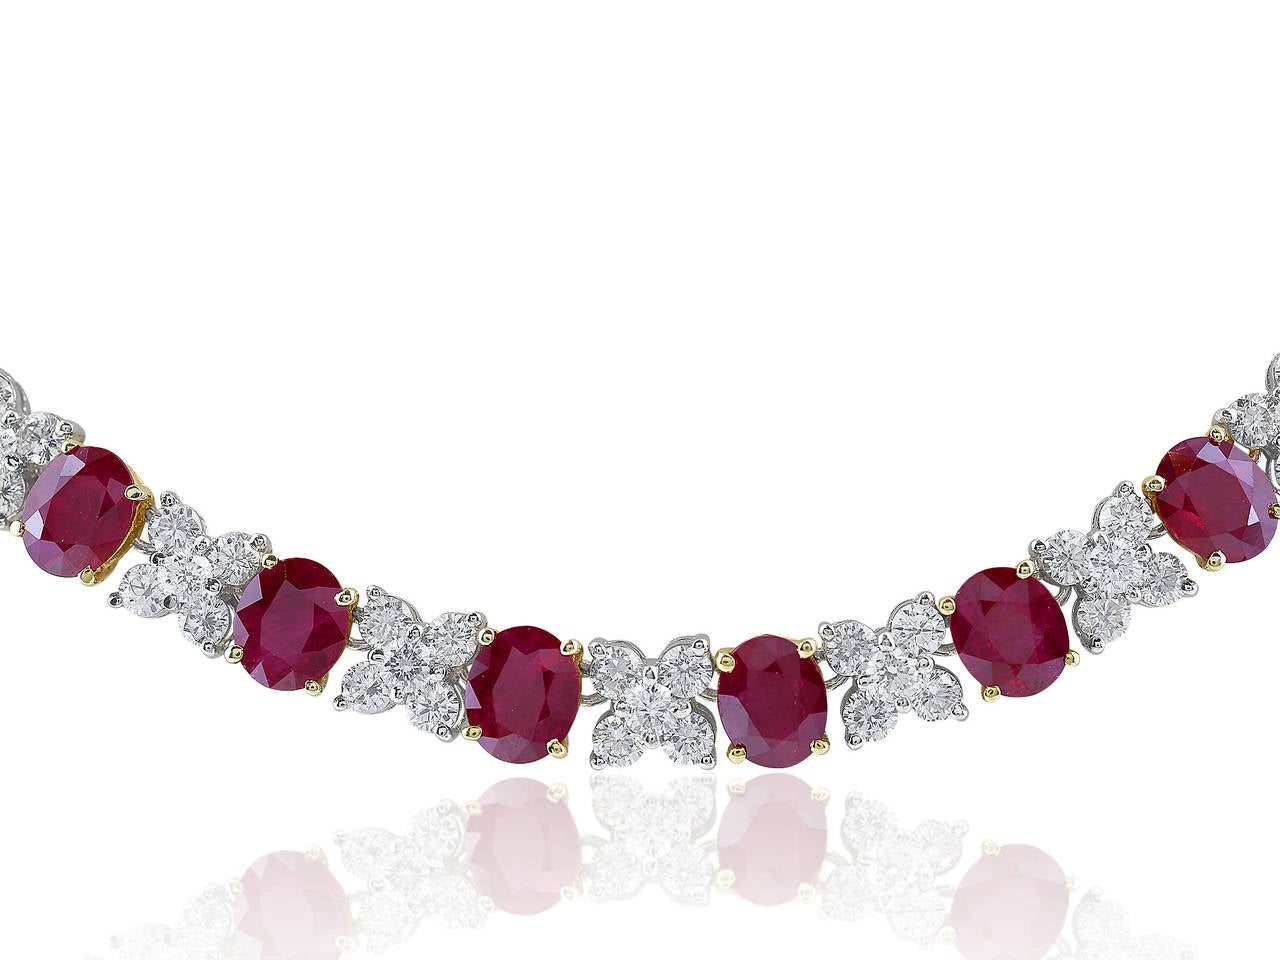 Two tone 18 karat yellow and white gold uniform necklace consisting of 39 oval shaped Burma rubies having a total weight of approximately 23.40 carats alternating with 195 round brilliant cut diamonds having a total weight of approximately 9.75